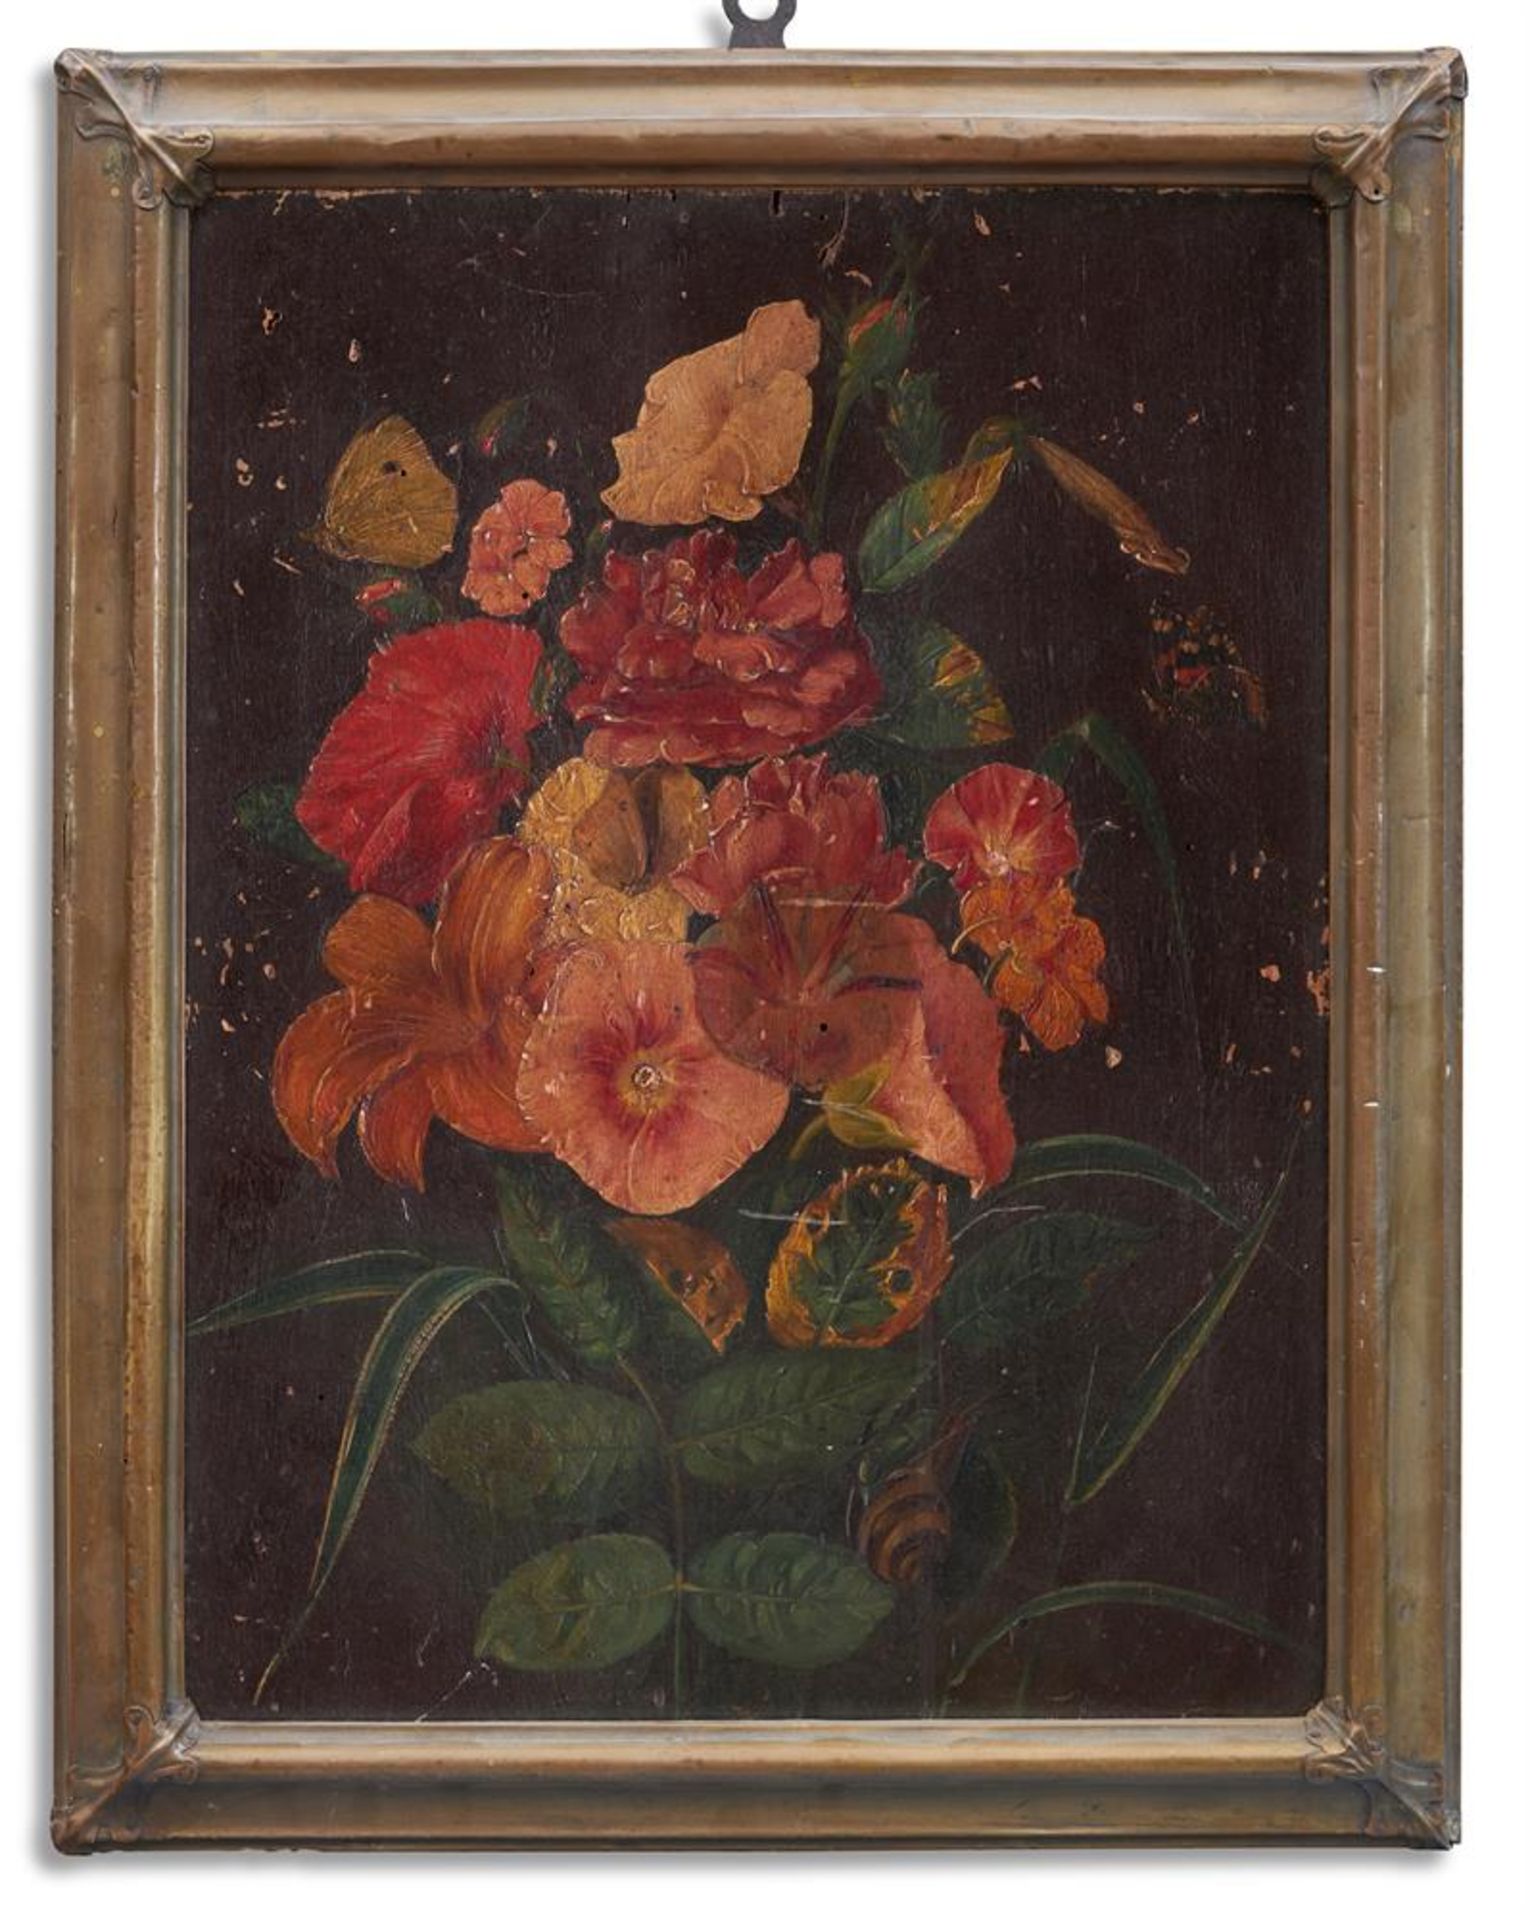 CONTINENTAL SCHOOL (19TH CENTURY), STILL LIFE OF FLOWERS WITH A BUTTERFLY AND SNAIL